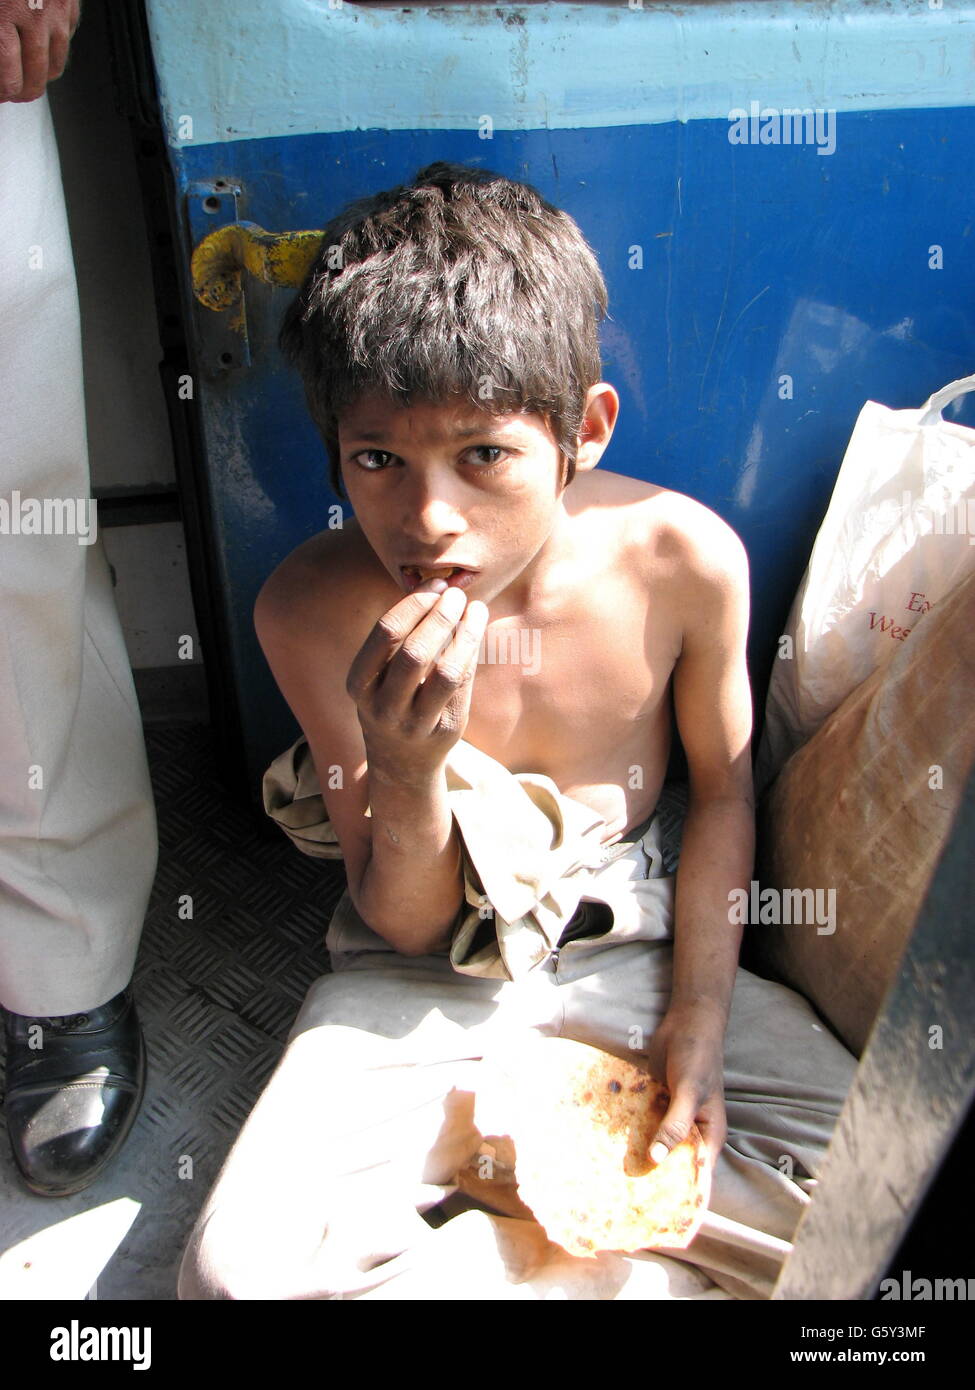 A poor hungry boy eating a stale roti (bread) in an Indian train Stock Photo